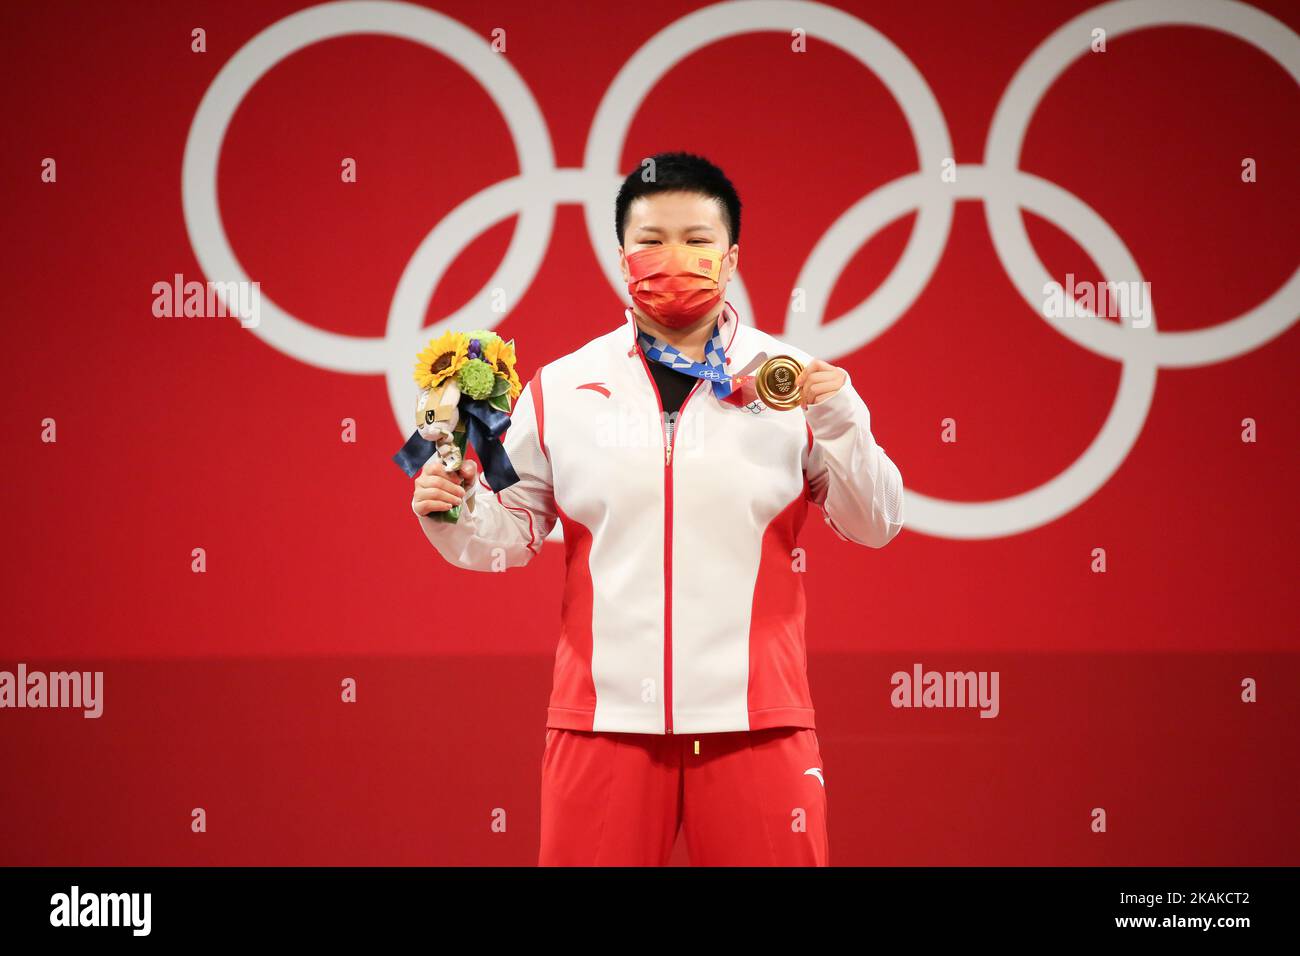 AUGUST 02, 2021 - TOKYO, JAPAN: Wang ZHOUYU of China wins the gold medal in the Weightlifting Women's 87kg at the Tokyo 2020 Olympic Games (Photo by Mickael Chavet/RX) Stock Photo